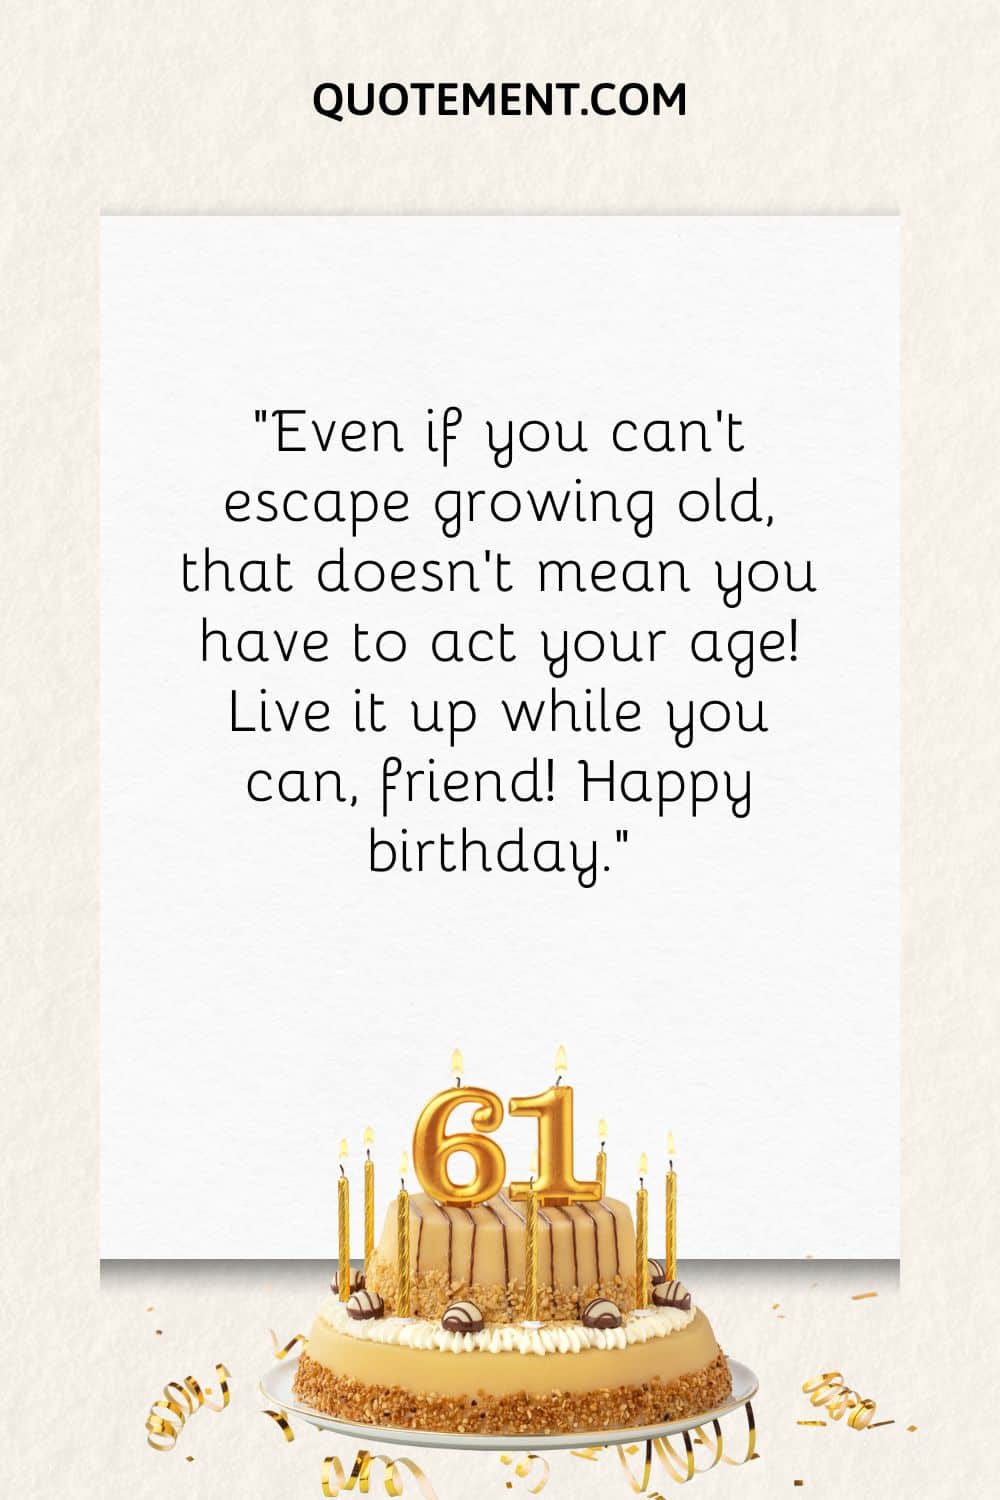 “Even if you can’t escape growing old, that doesn’t mean you have to act your age! Live it up while you can, friend! Happy birthday.”